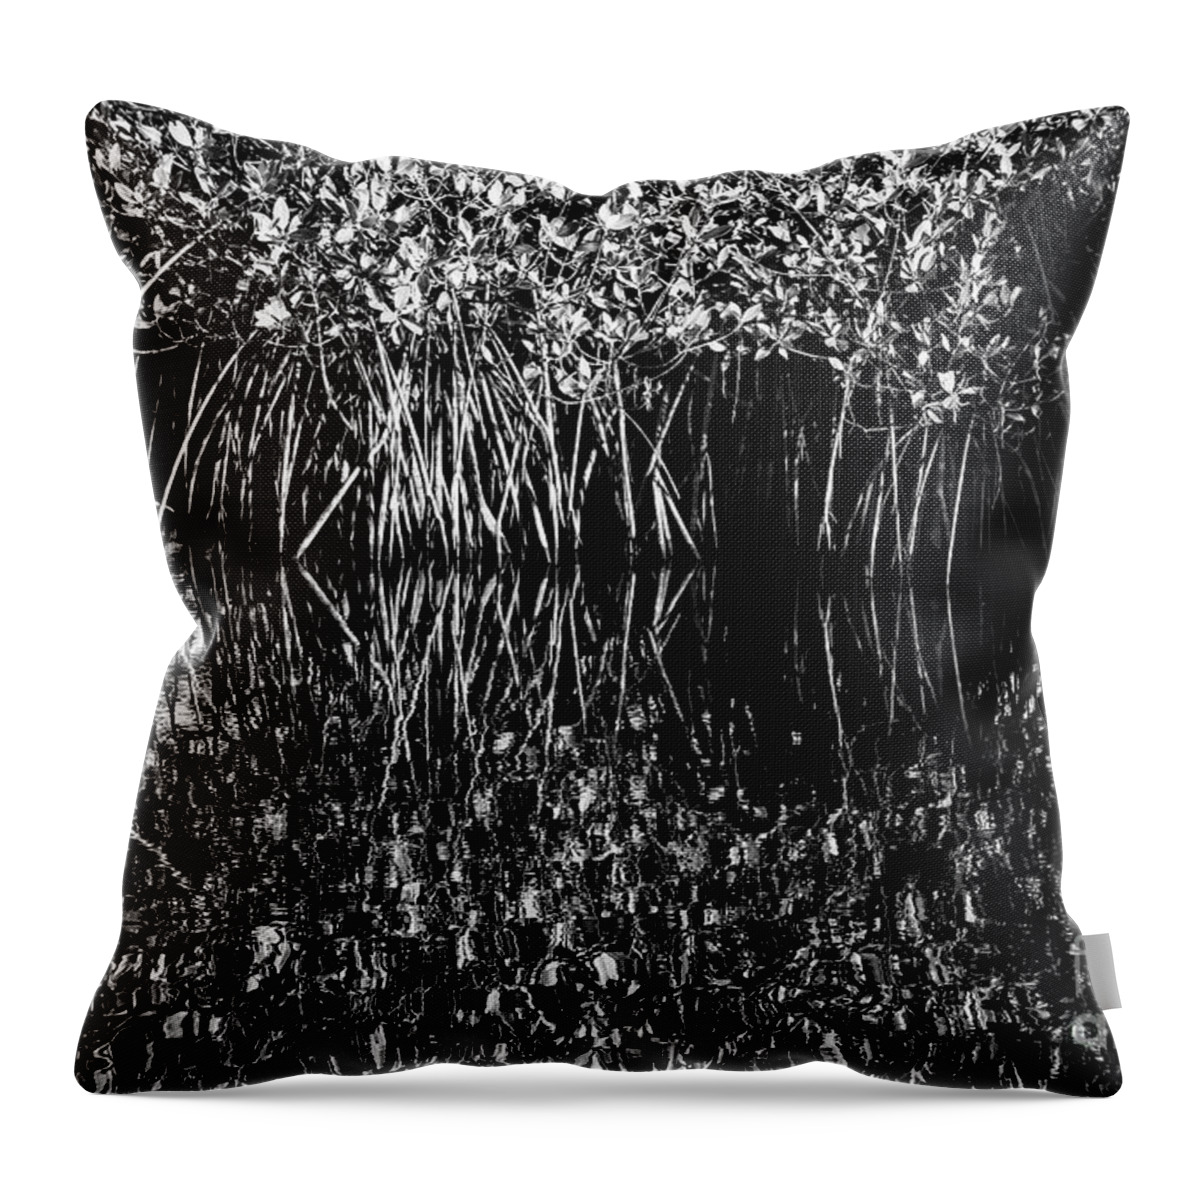 The Everglades Throw Pillow featuring the photograph Morning Light Mangrove Reflection 2 by Bob Phillips